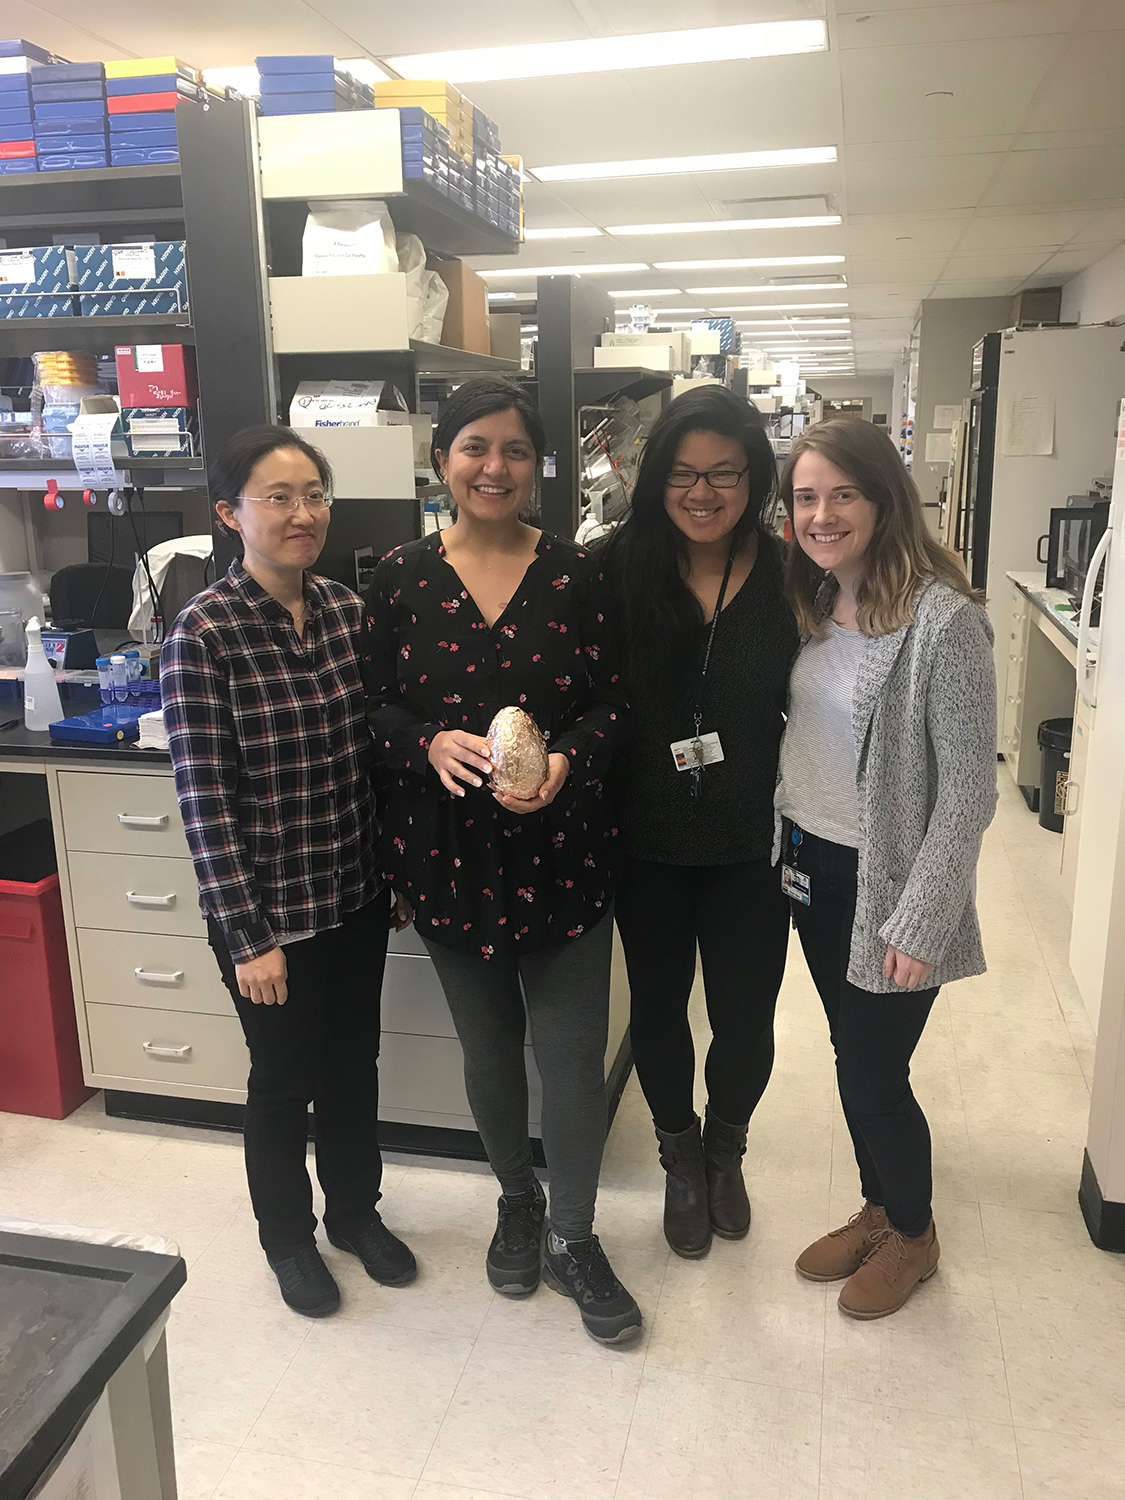 The chick lab with an egg